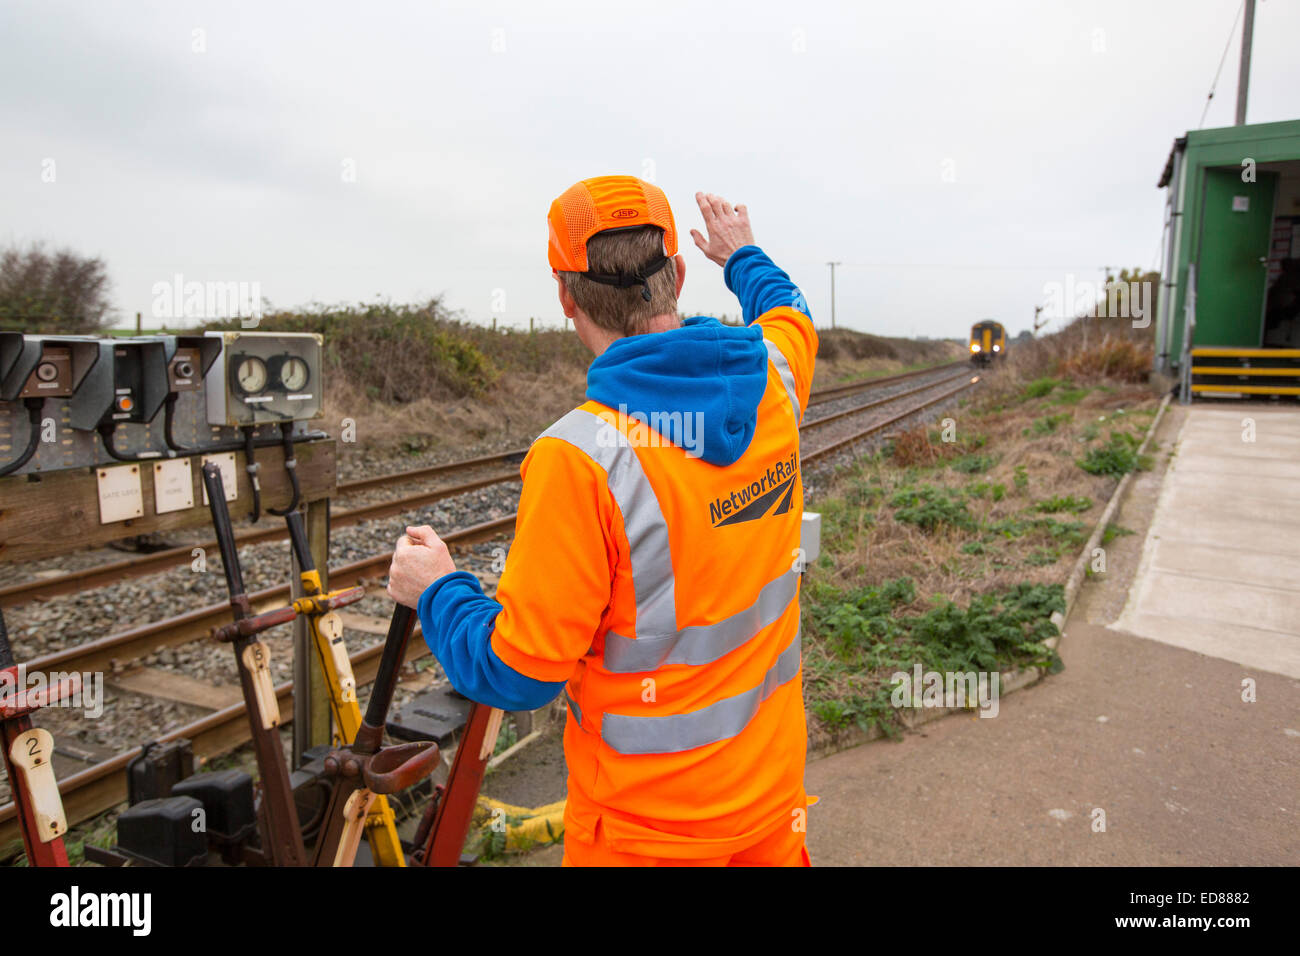 A man switching points at a level crossing near Haverigg, Cumbria, UK, as a train approaches. Stock Photo